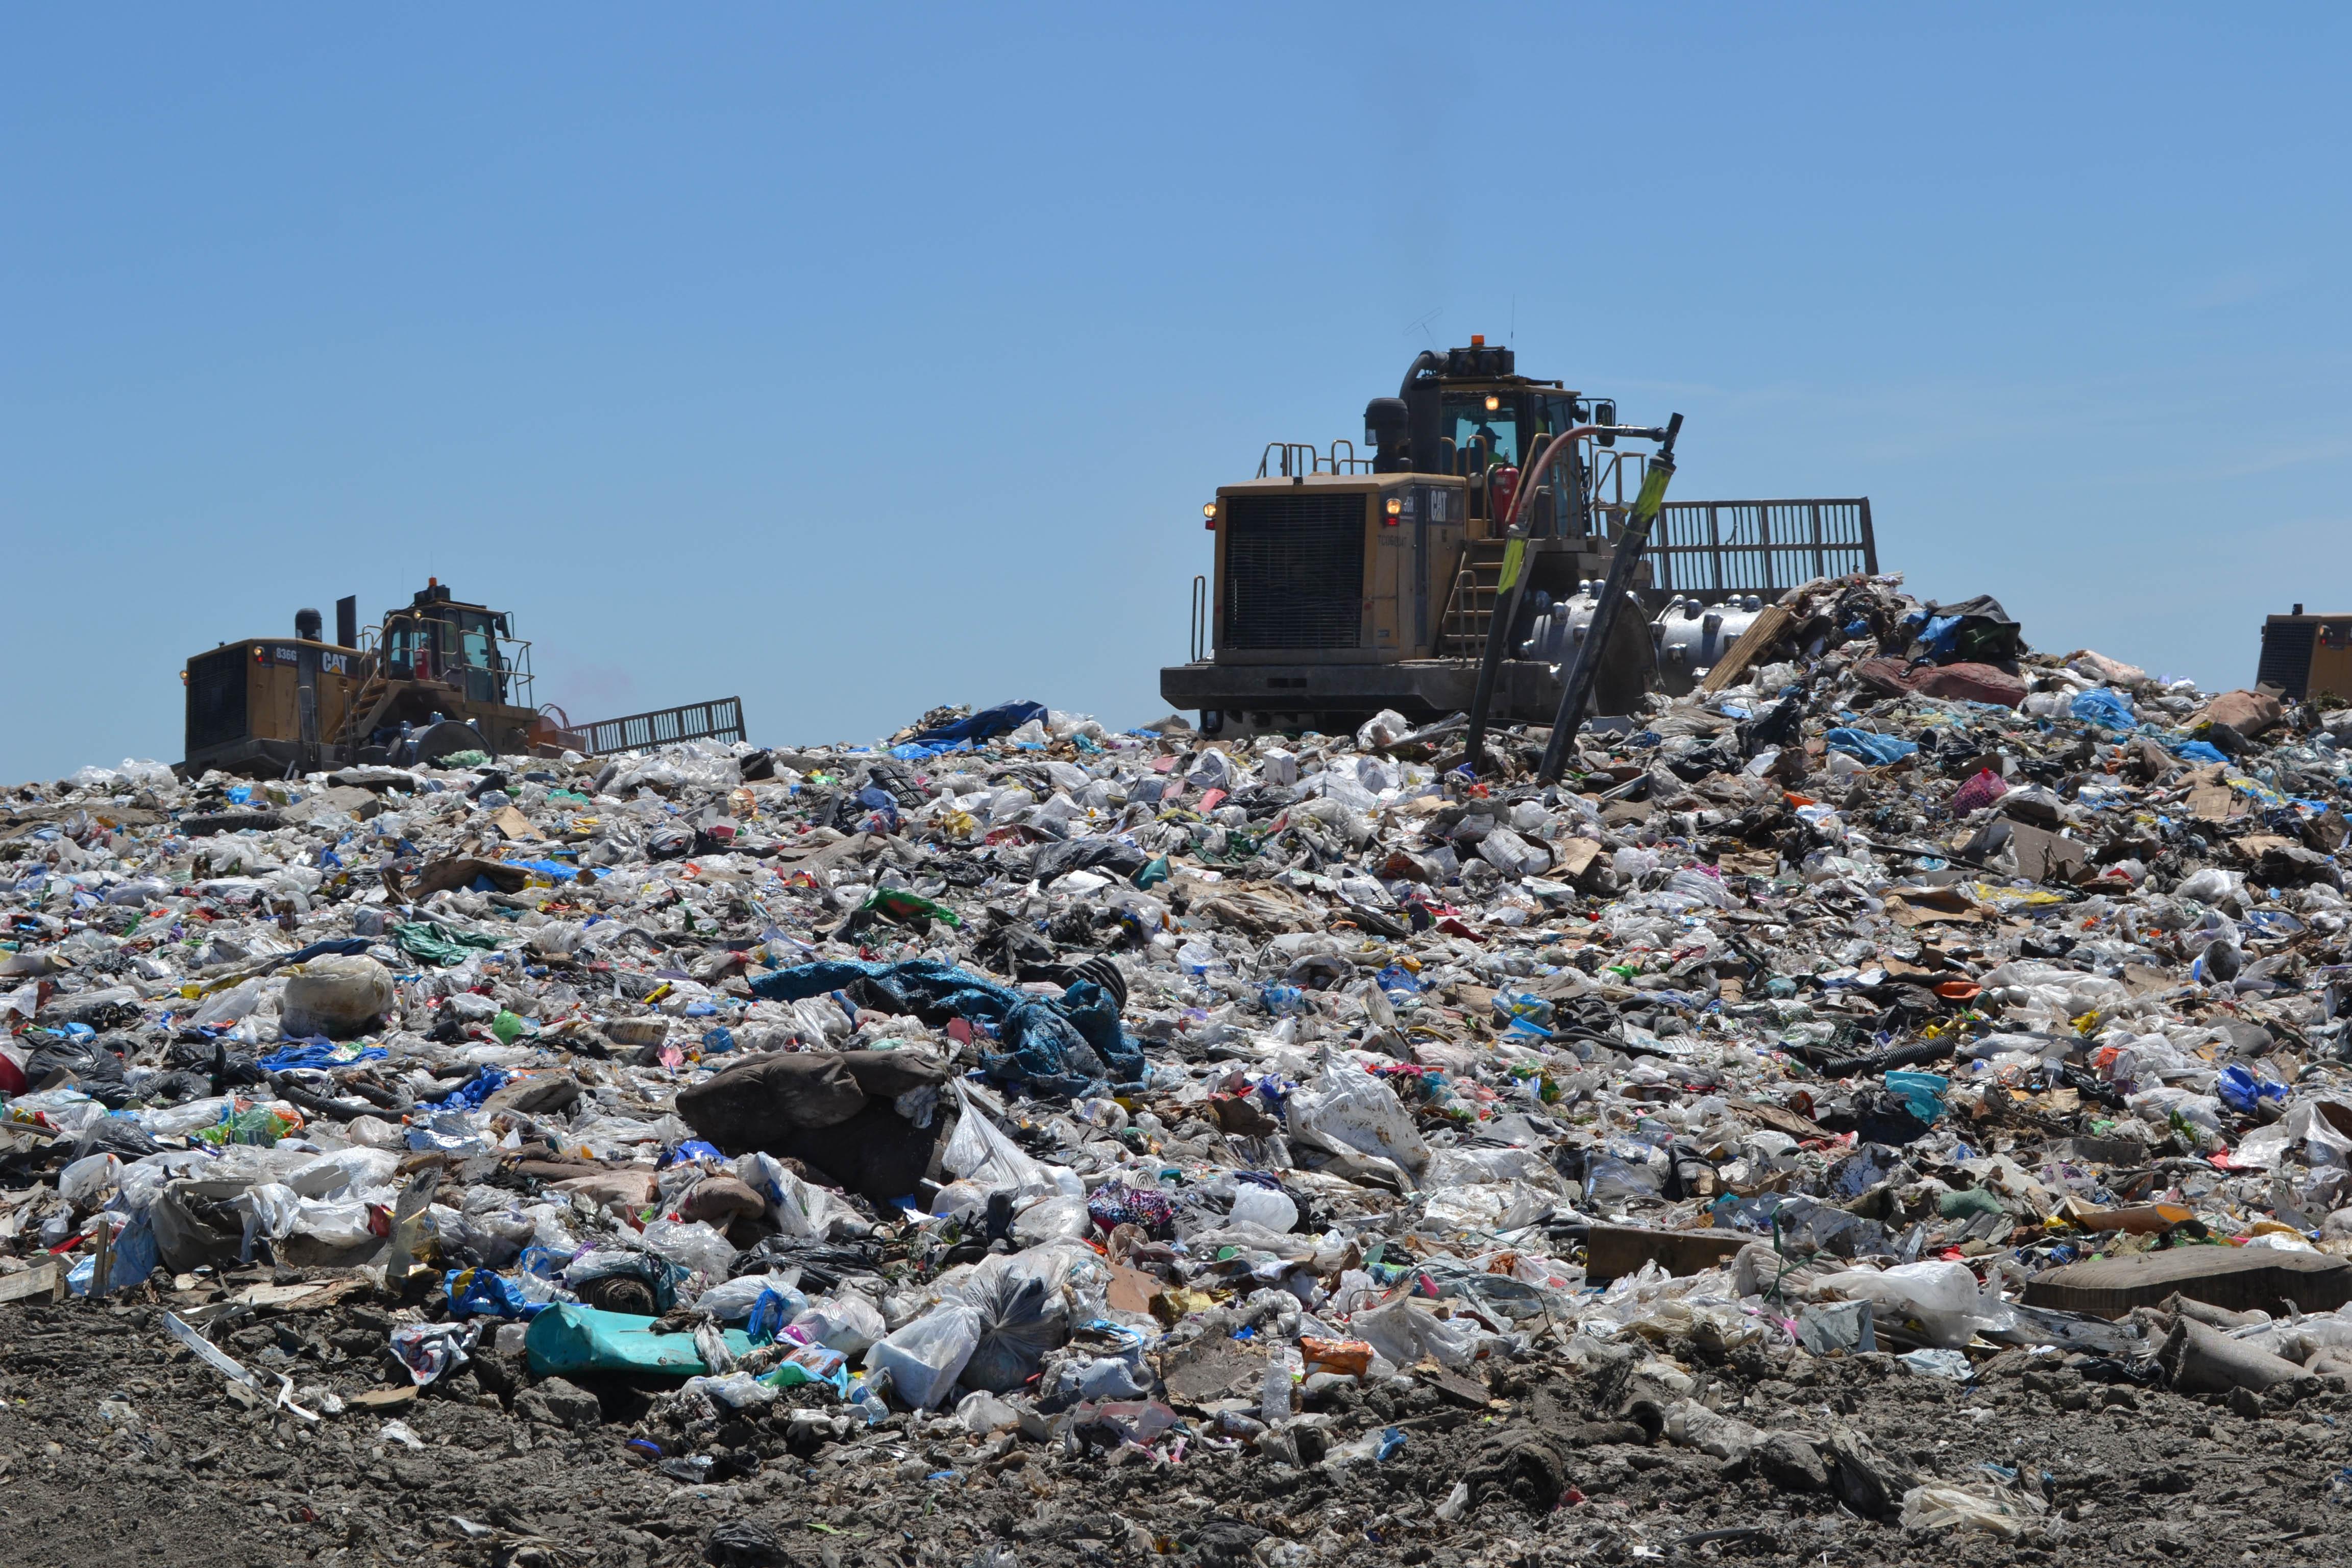 About 5,000 tons of trash from Chicago and the surrounding is are dumped every day at a landfill in Livingston County.